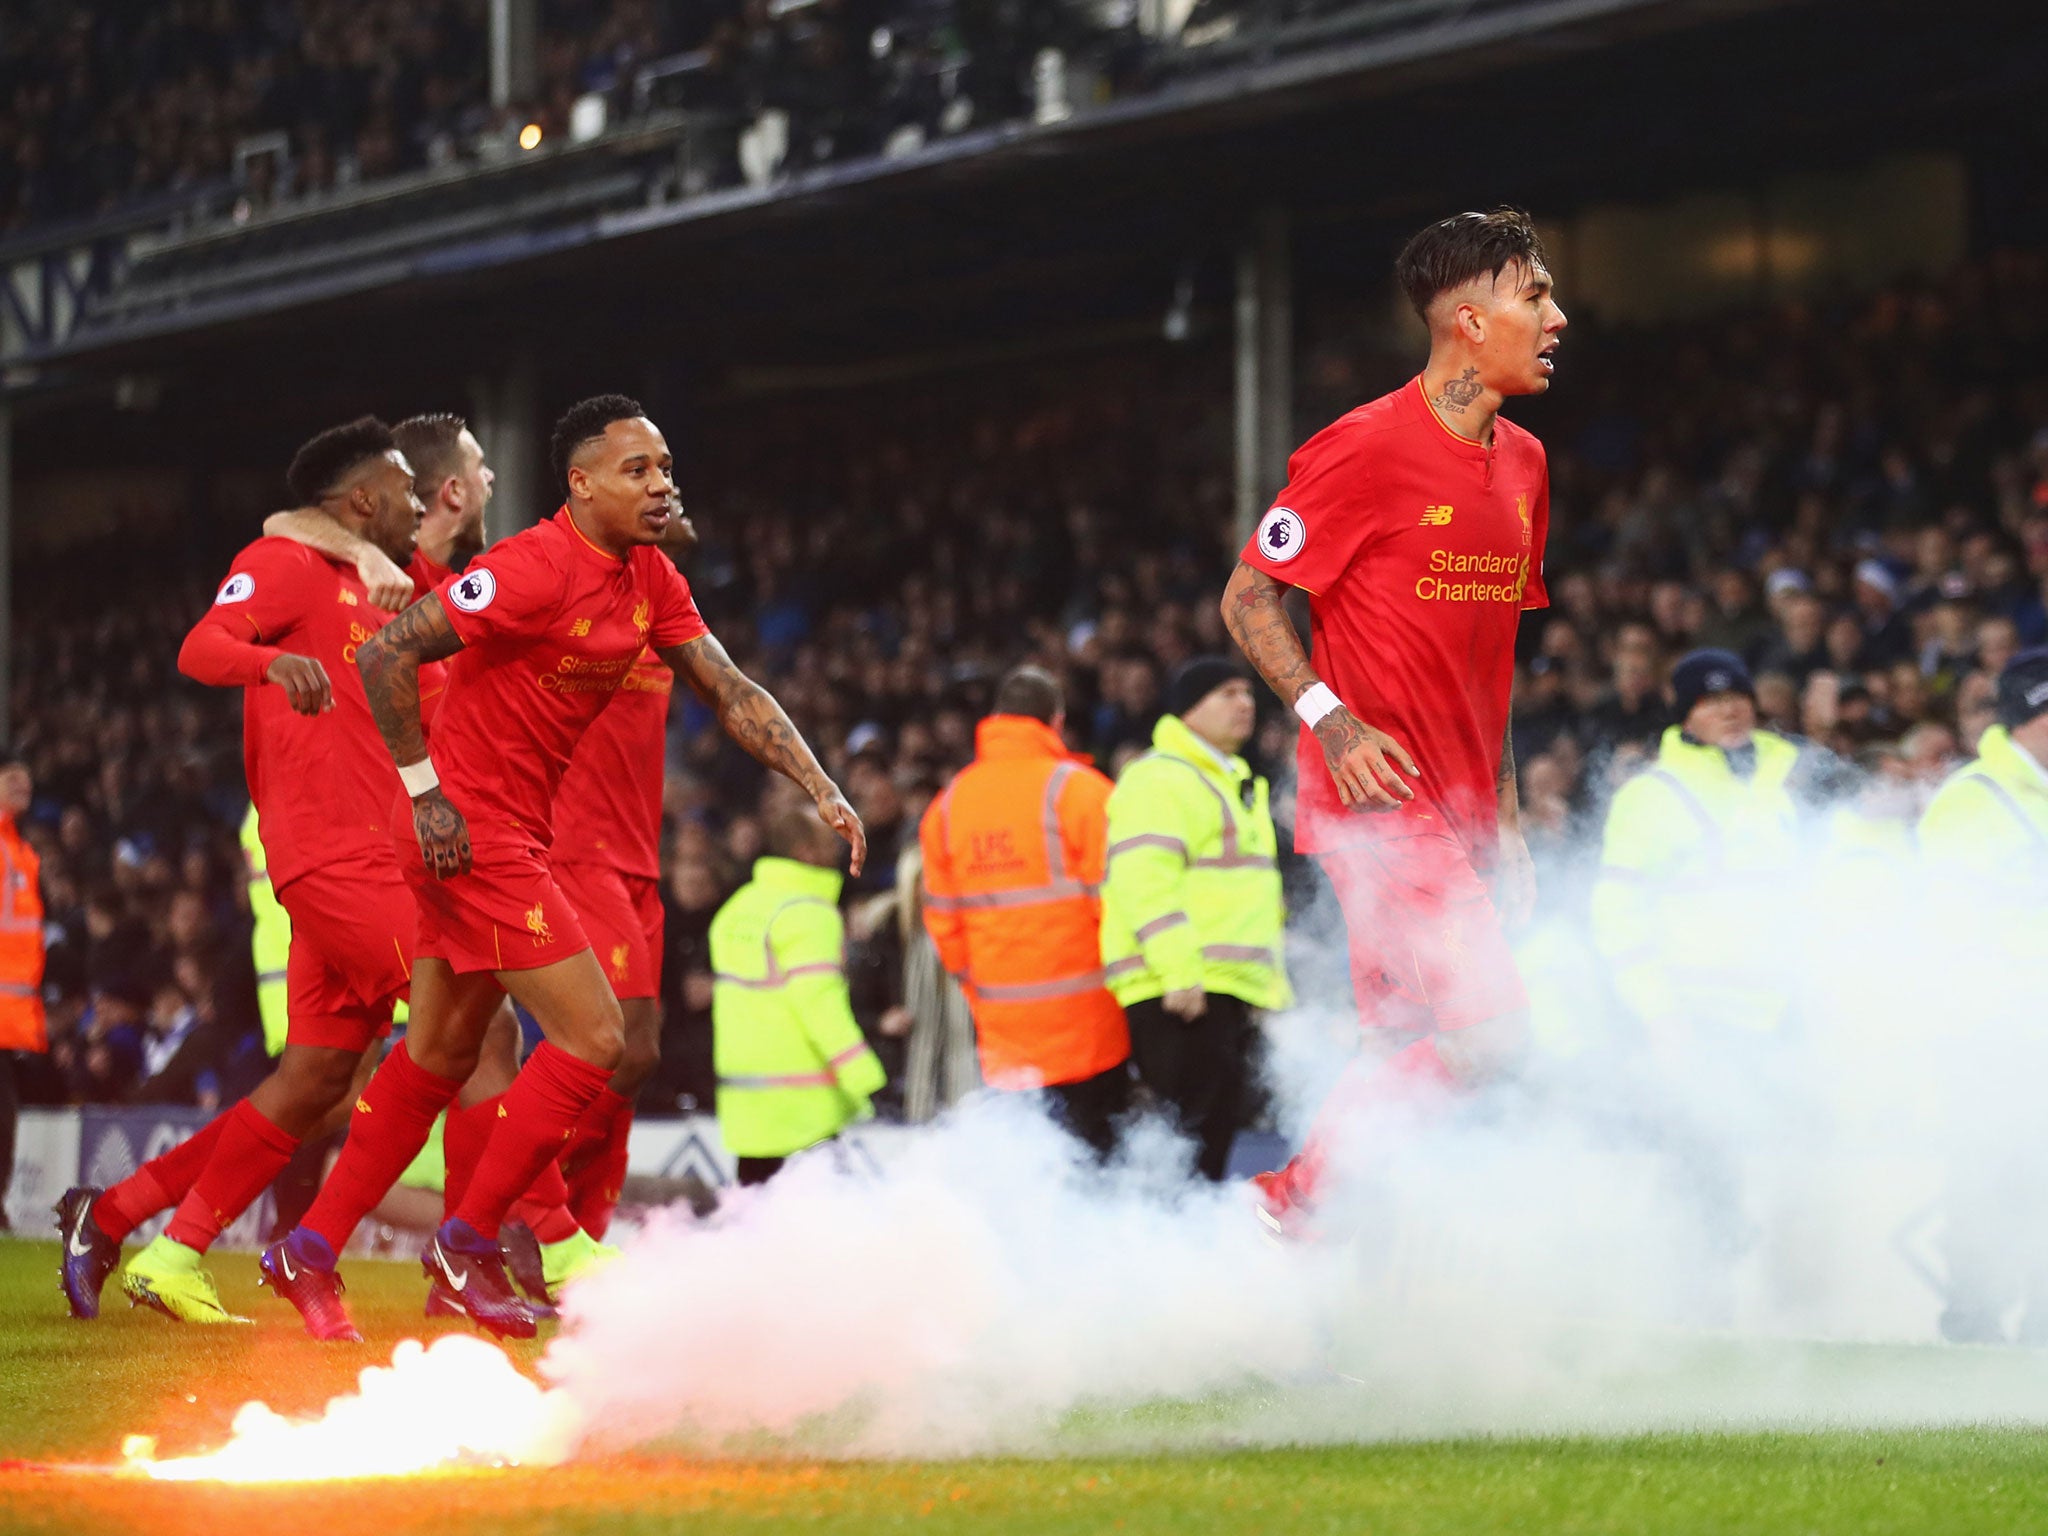 Liverpool emerged victorious in the 227th Merseyside derby